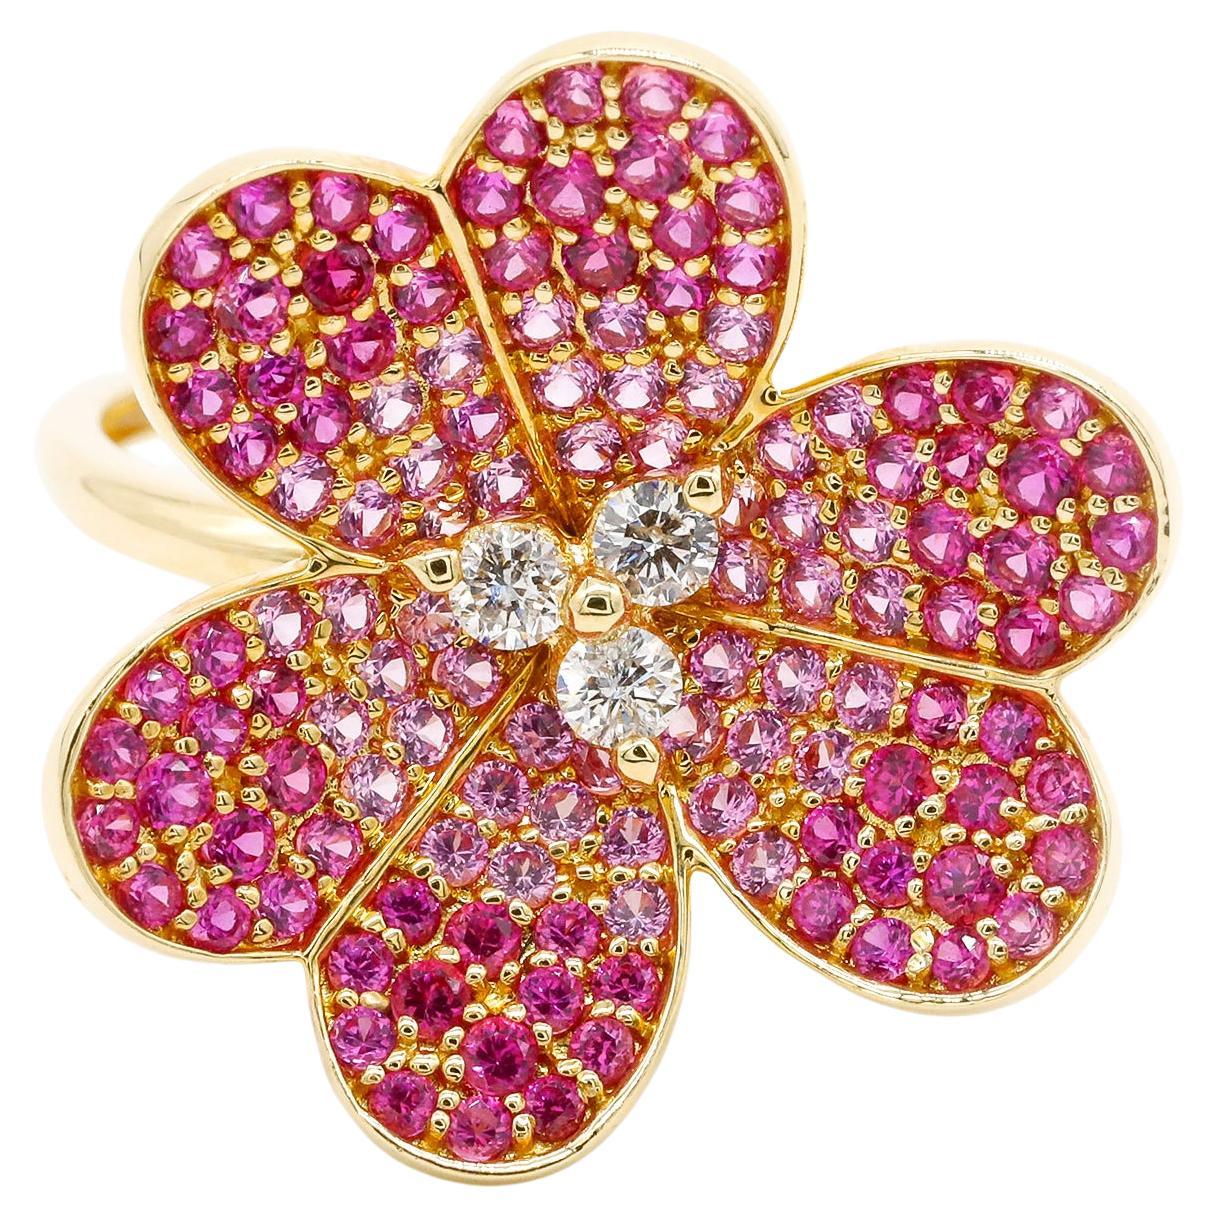 0.80 Carat Round Diamond Pink Sapphire Clove Flower 14K Yellow Gold Cocktail Ring

This modern ring features a total of 0.80 carats of diamond round shape and 2.20 carats Pink Sapphire Gemstone Set in 14K Yellow Gold.

We guarantee all products sold